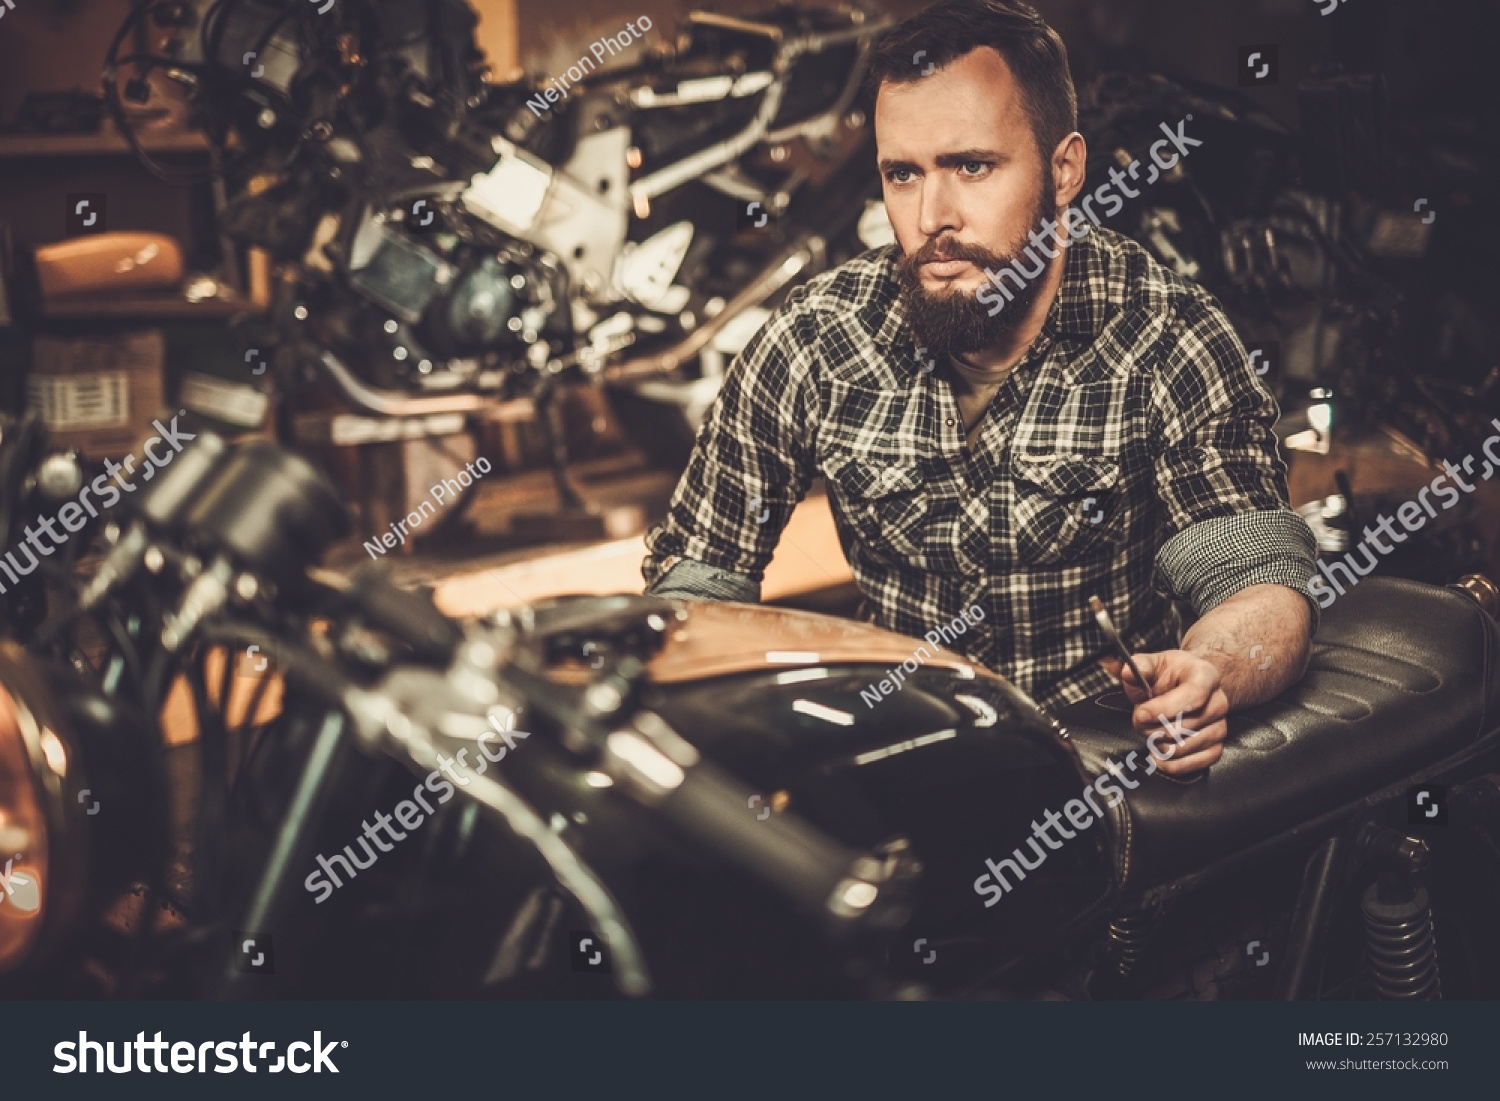 Mechanic Building Vintage Style Caferacer Motorcycle Stock Photo Shutterstock